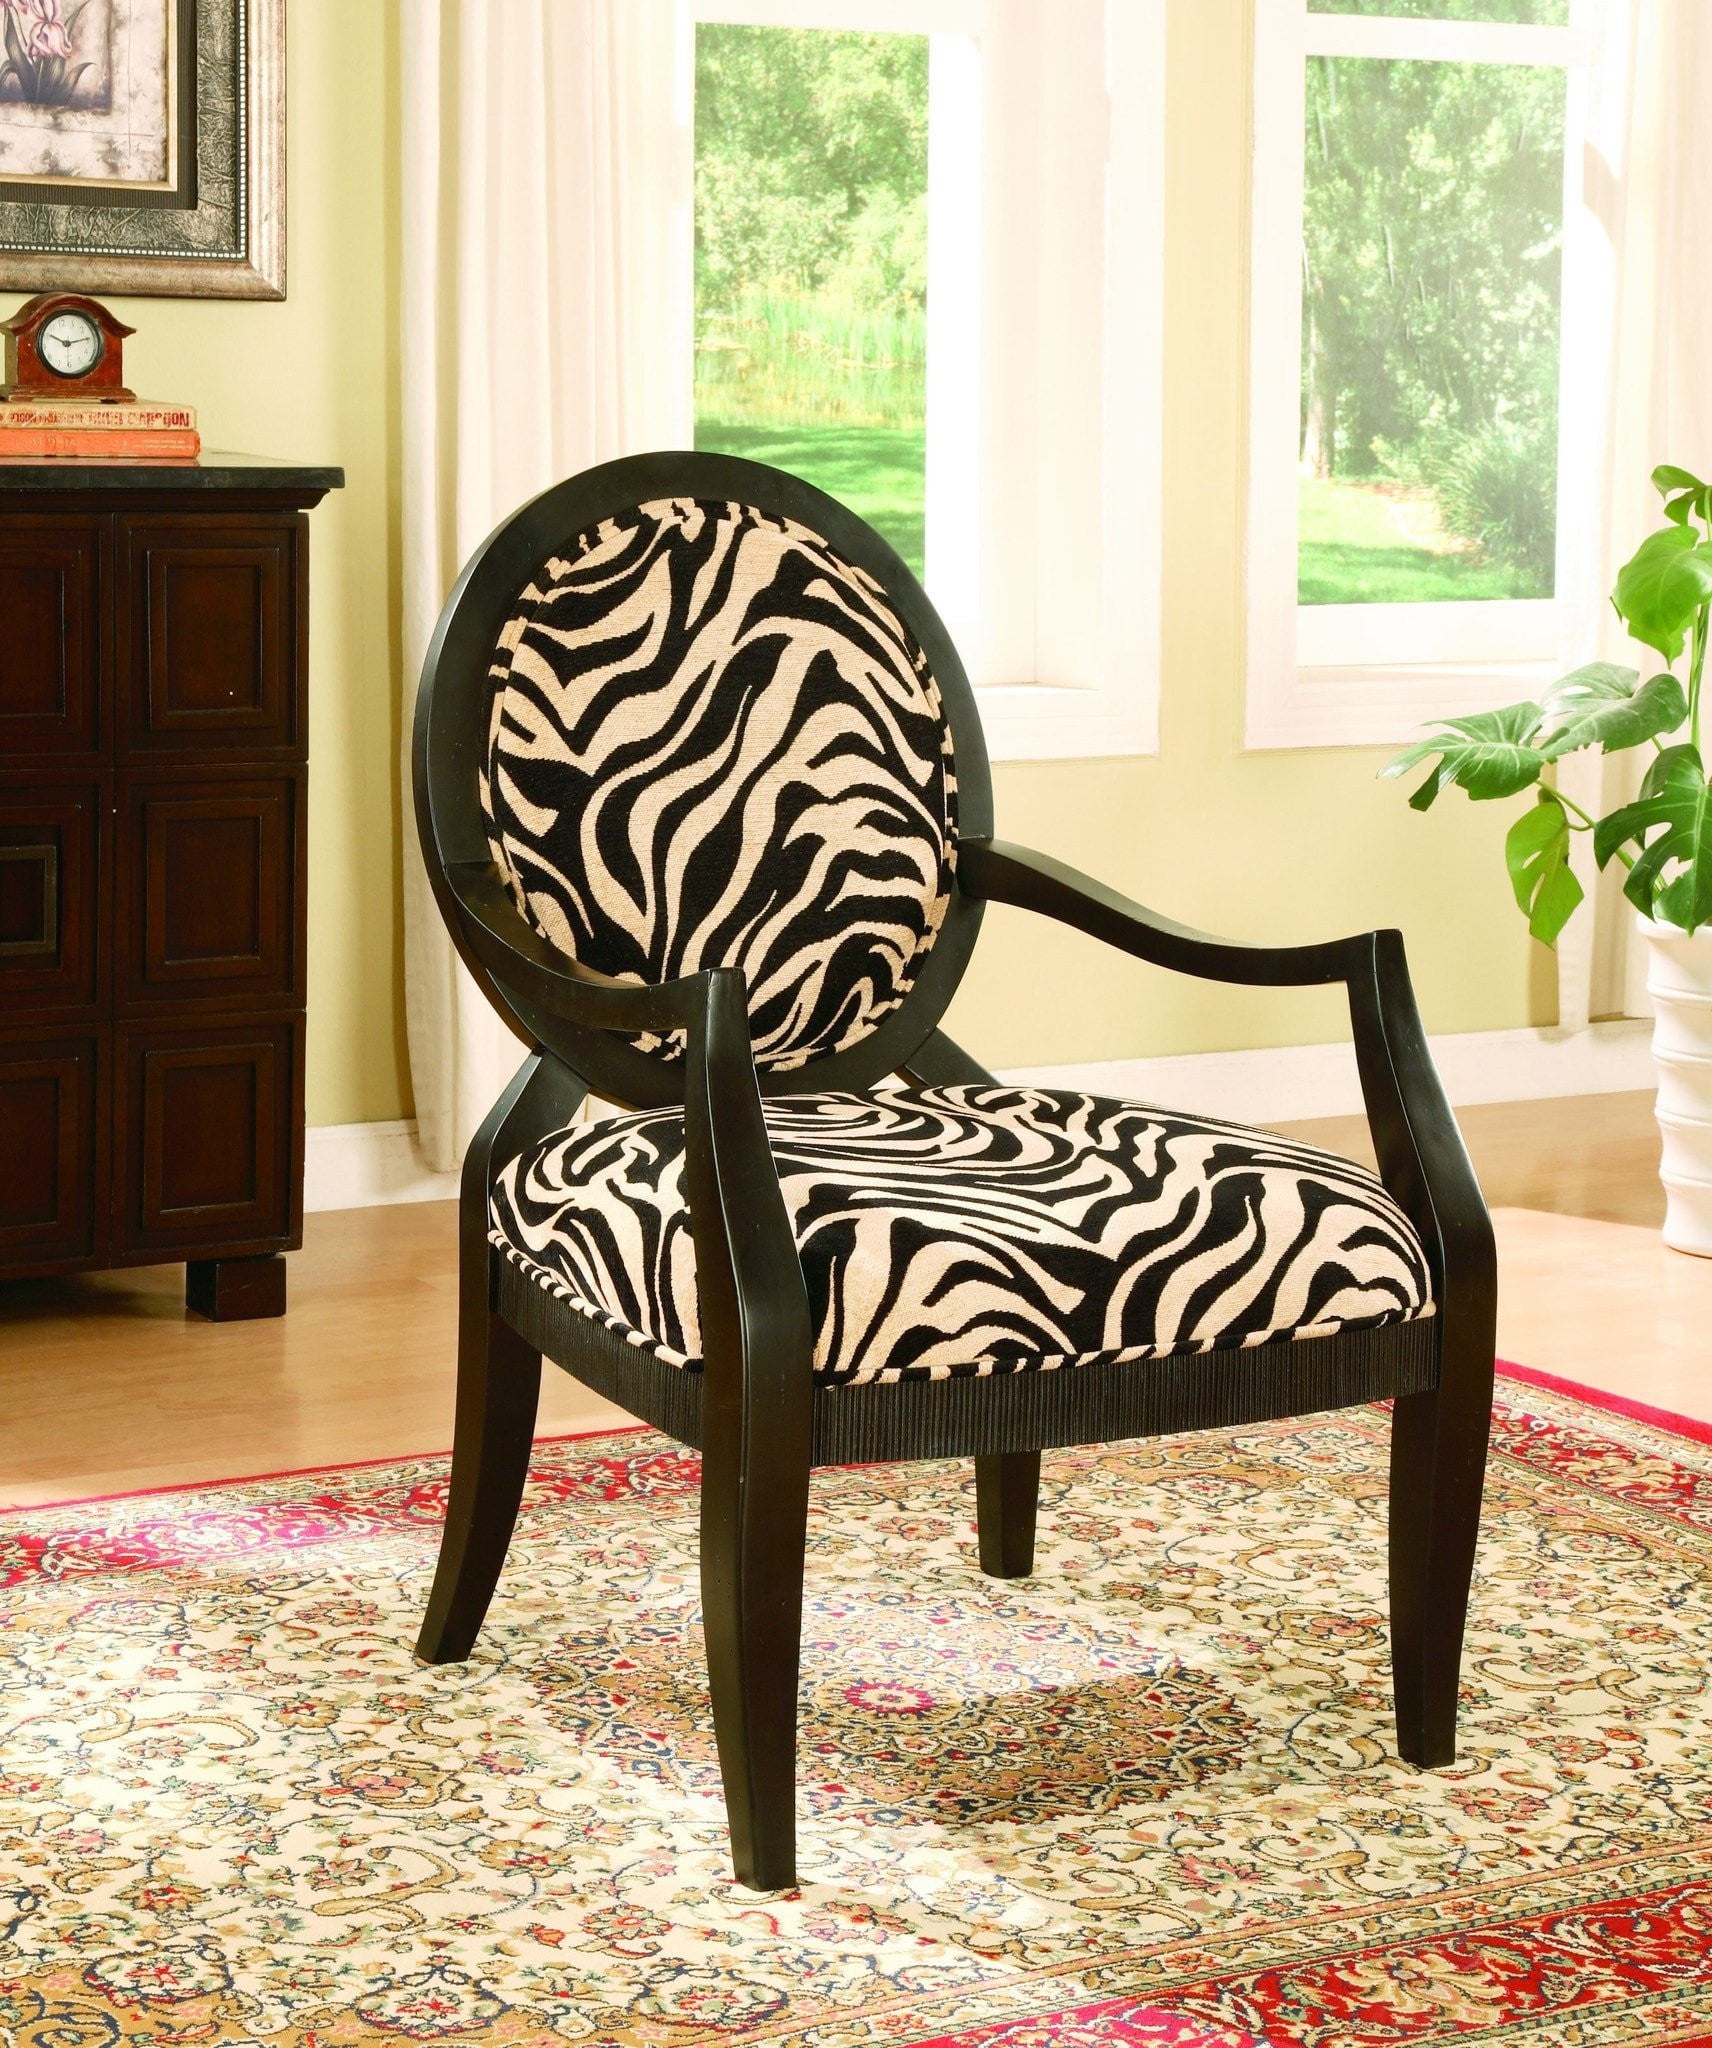 Zebra Print Chair : What An Accent Piece And Real Statement This Chair